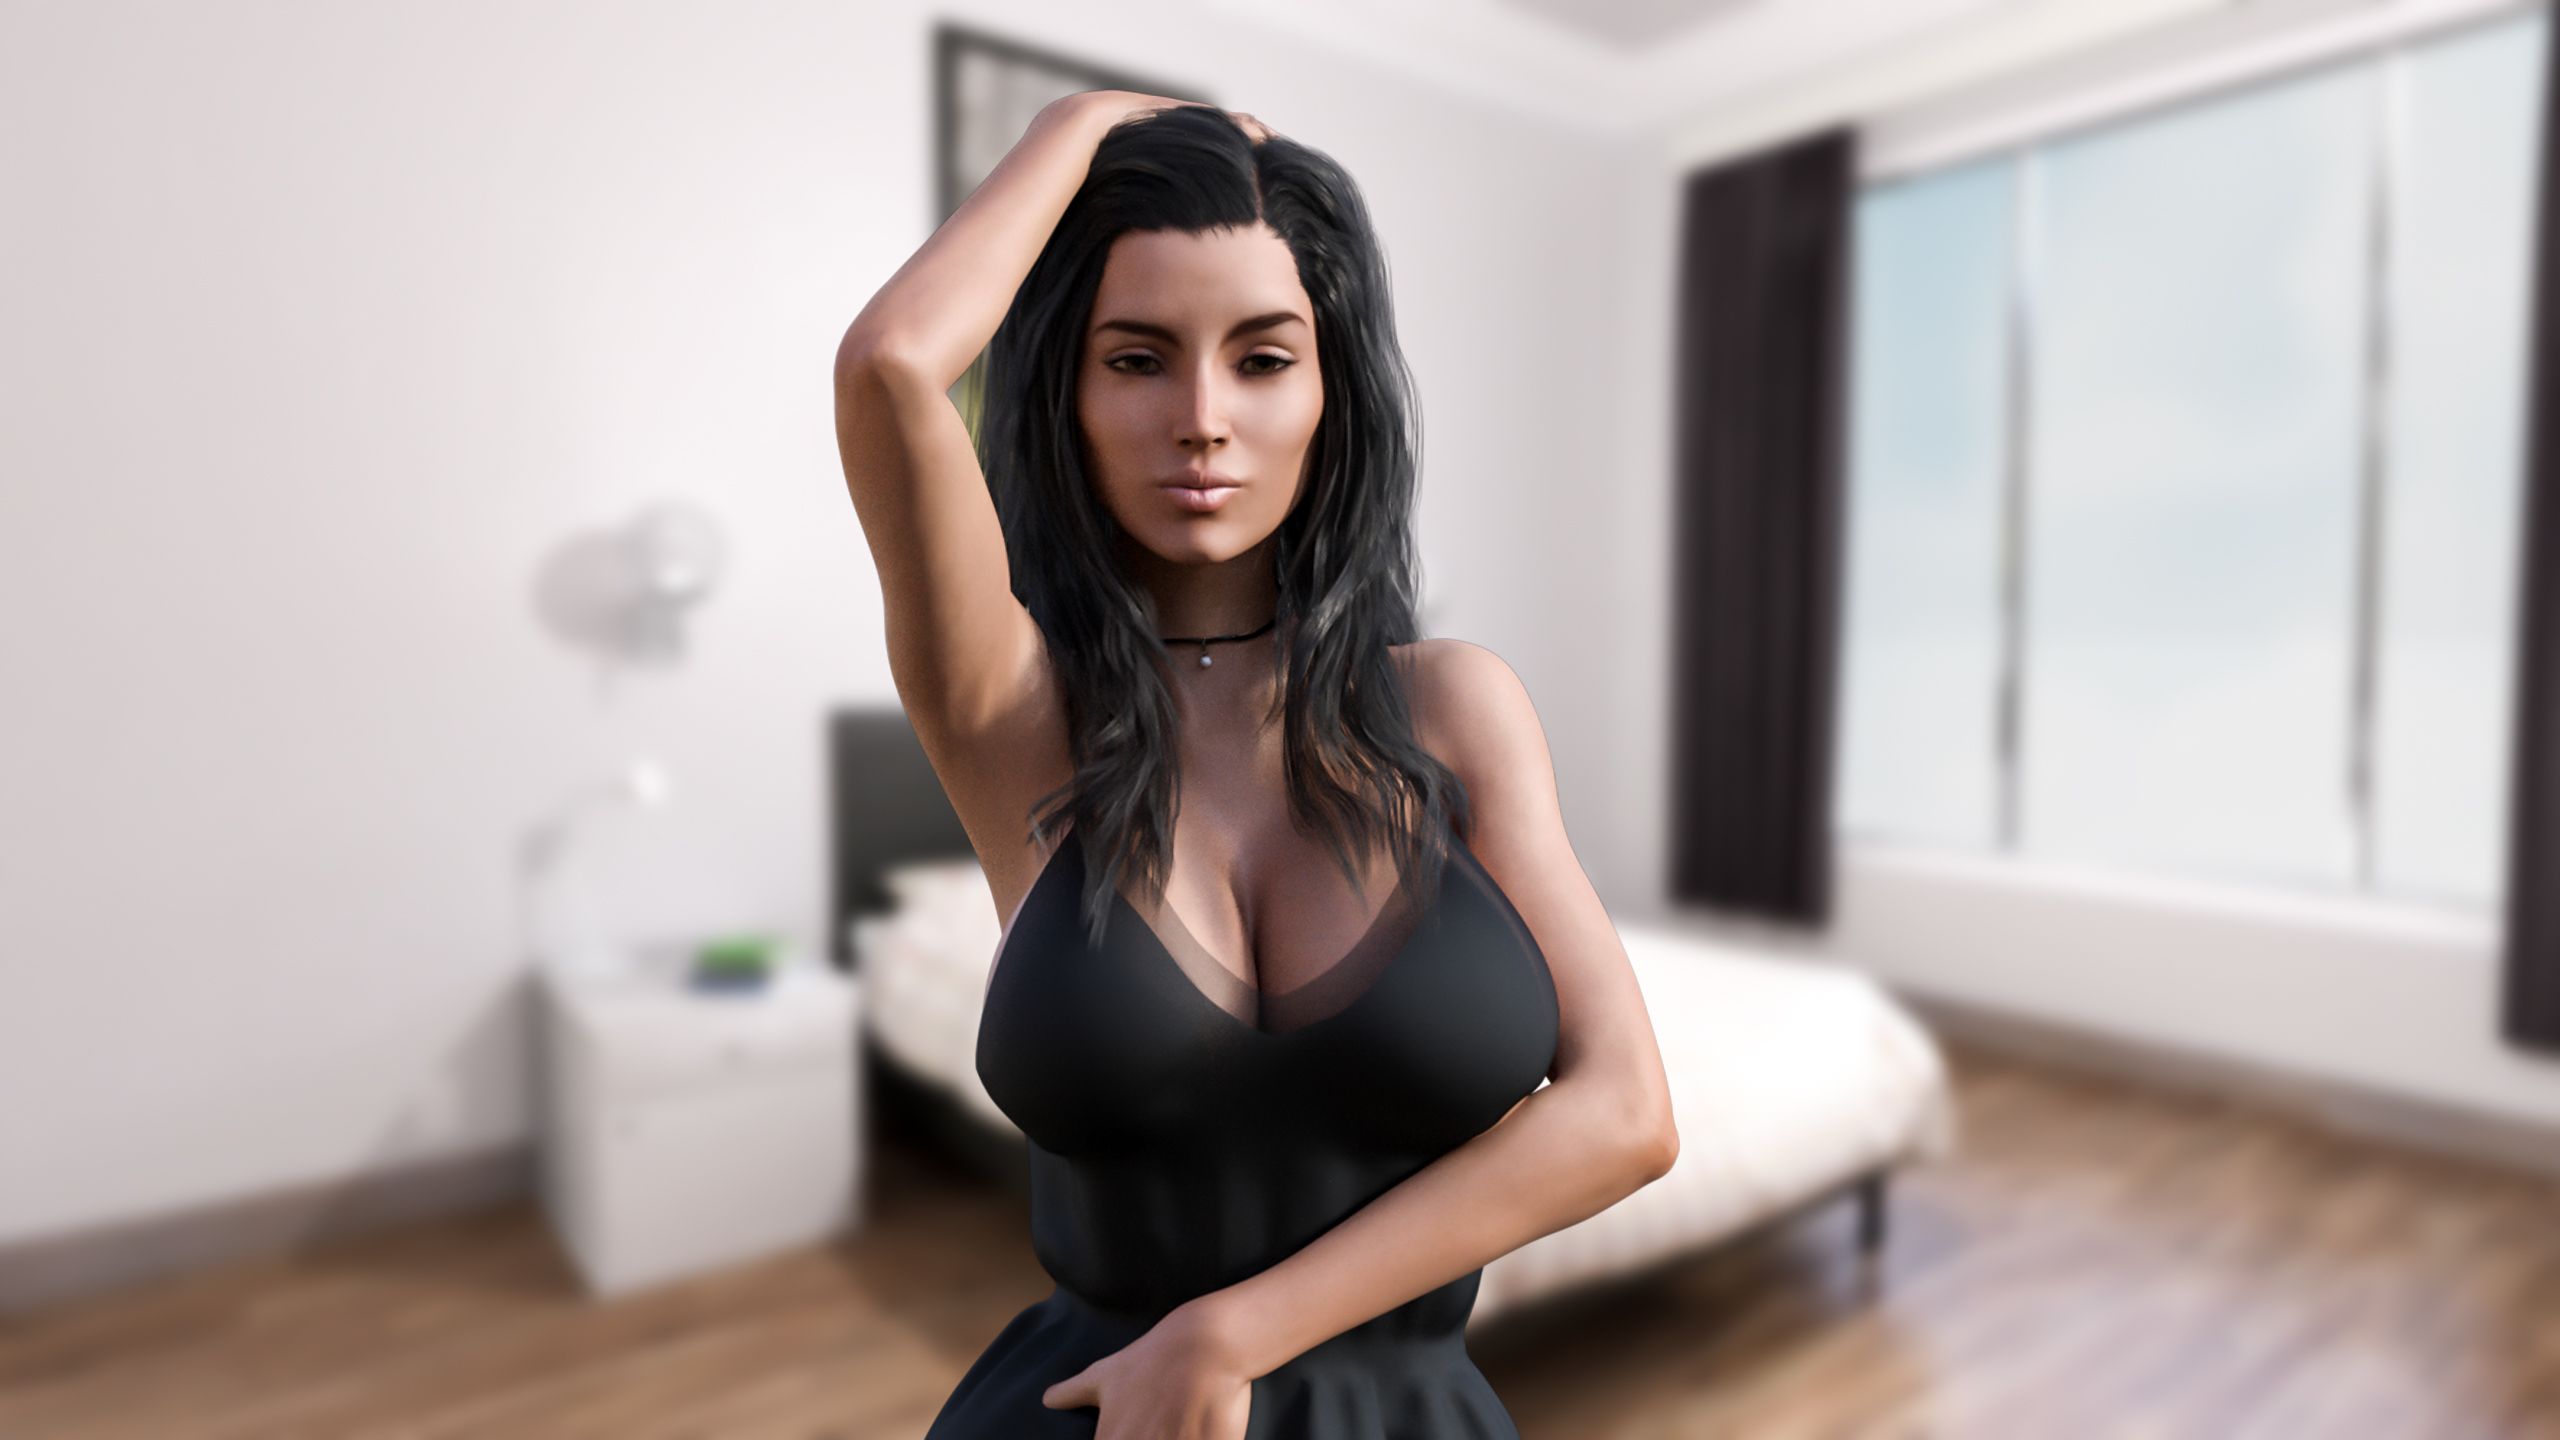 Cipciugames The Doppelganger Adult Game Download Free